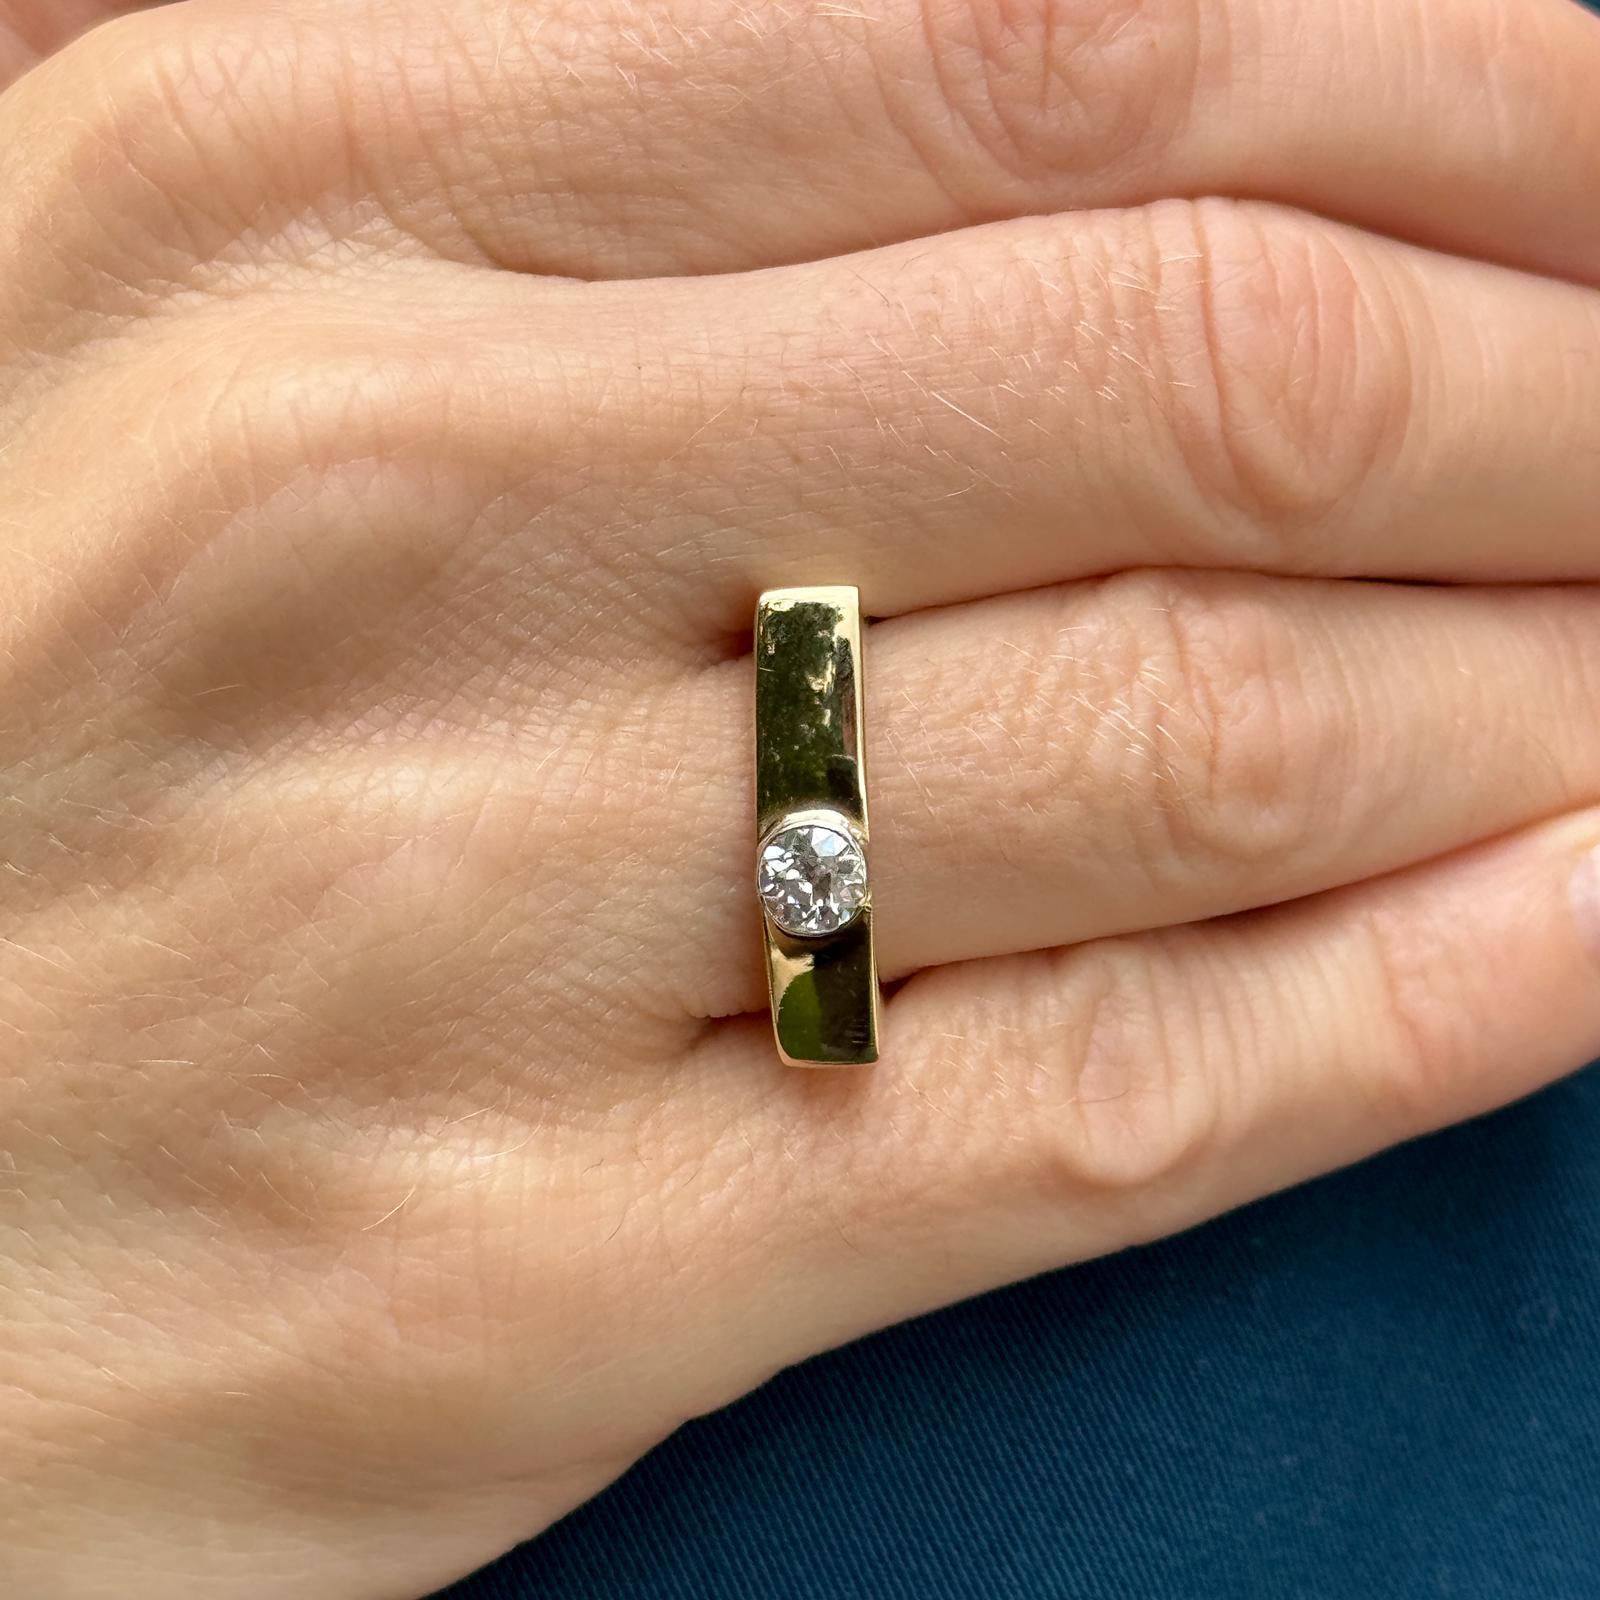 Bezel set diamond band ring crafted in 18 karat yellow gold. The ring features a single Old European cut diamond weighing approximately .50 carat and graded G color and SI1 clarity. The squared off band measures 5.5mm in width and is currently size